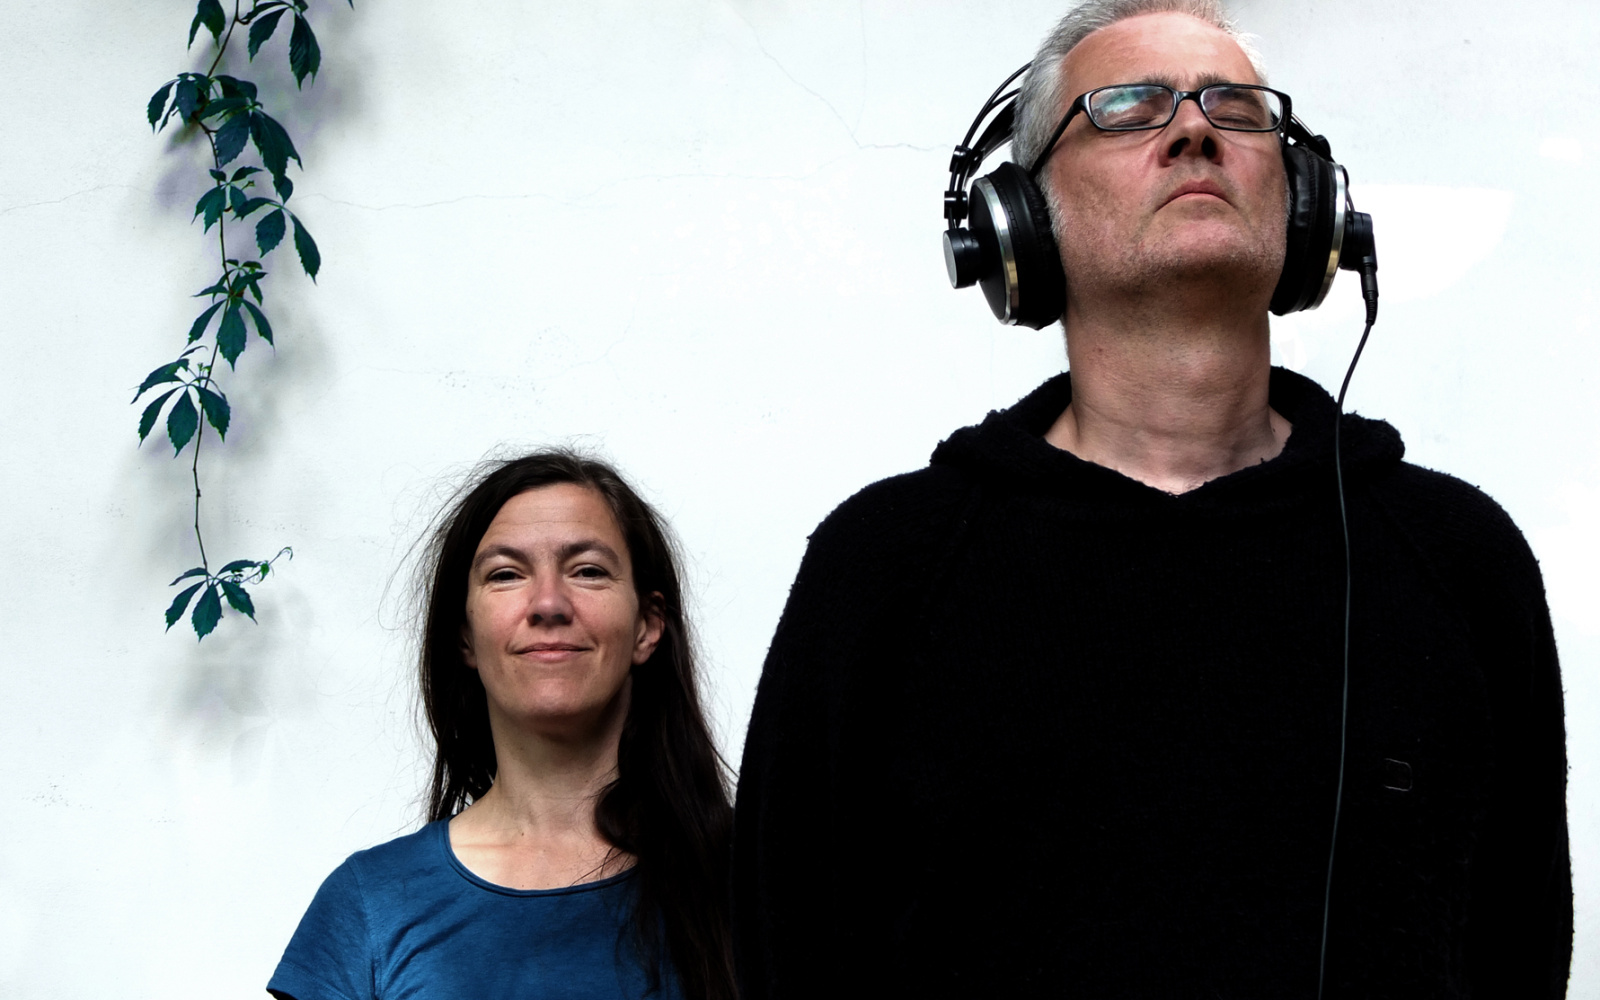 A man with closed eyes and headphones stands right in front of a woman who looks at the camera